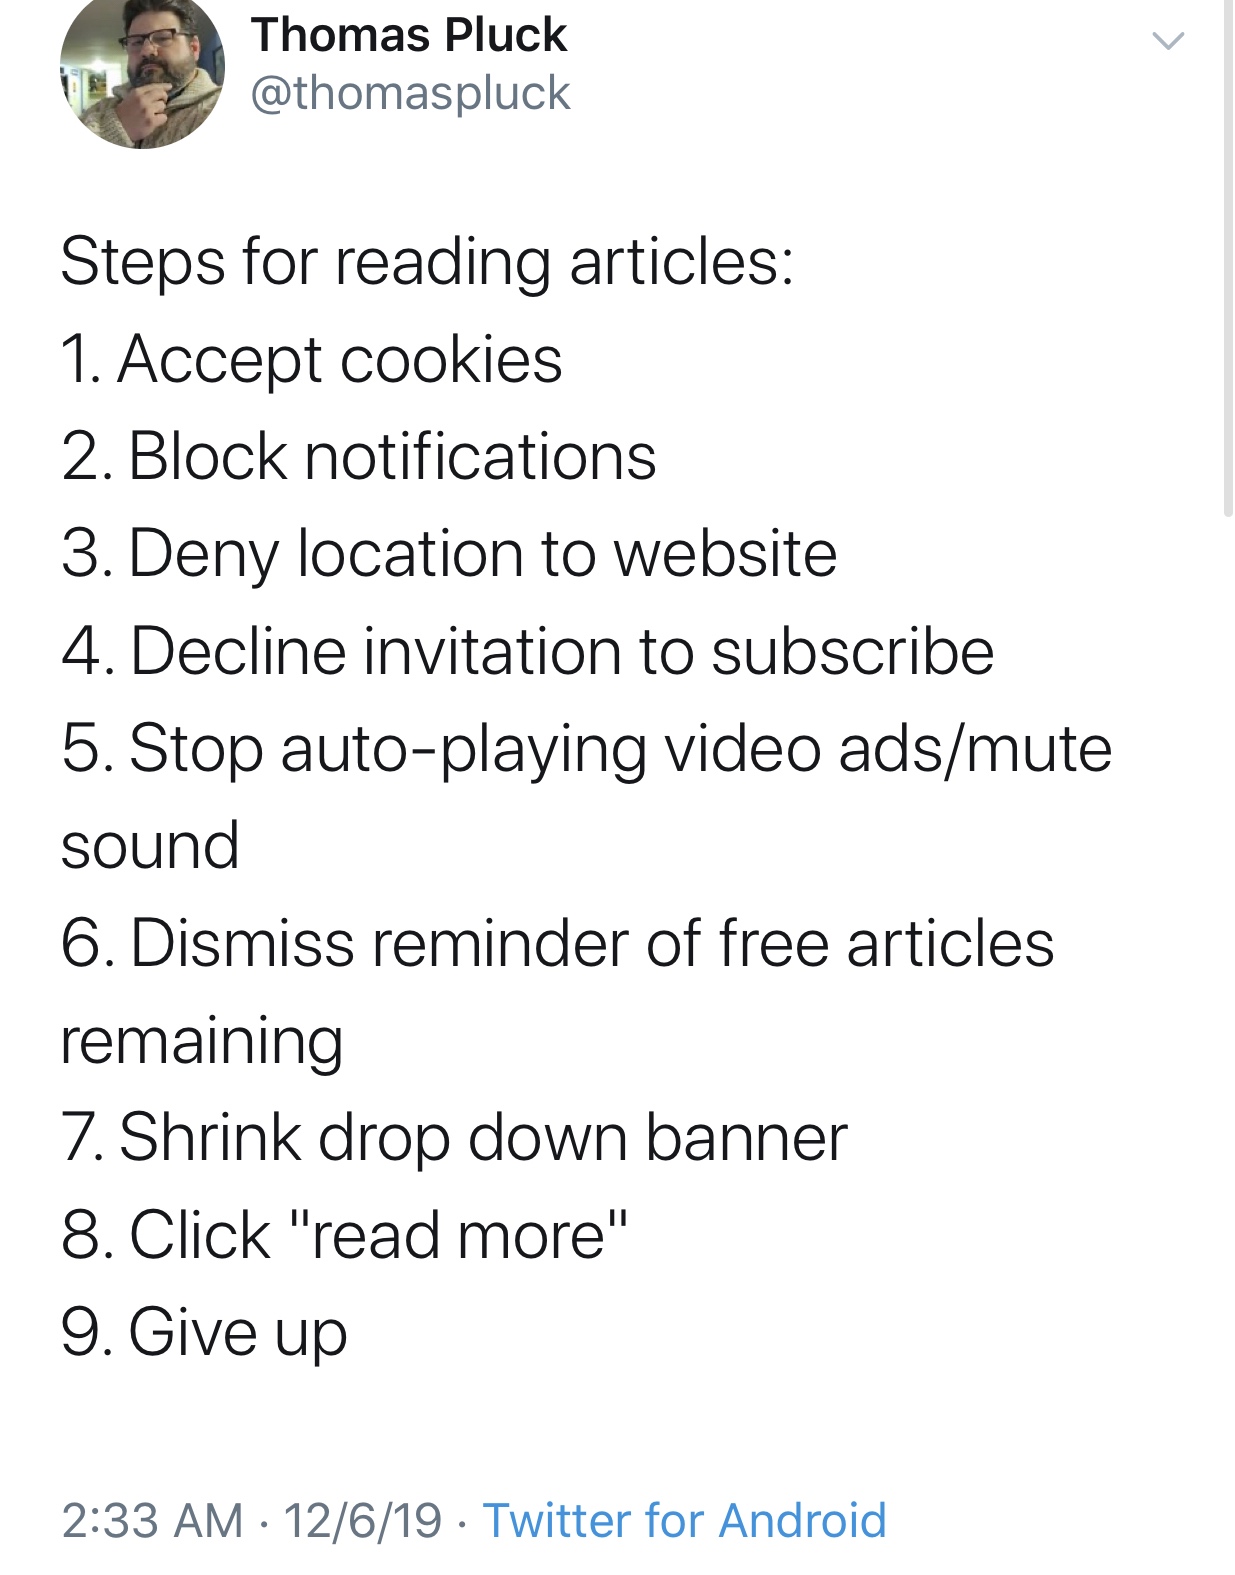 aoc wayfair tweet - Thomas Pluck Steps for reading articles 1. Accept cookies 2. Block notifications 3. Deny location to website 4. Decline invitation to subscribe 5. Stop autoplaying video adsmute sound 6. Dismiss reminder of free articles remaining 7. S